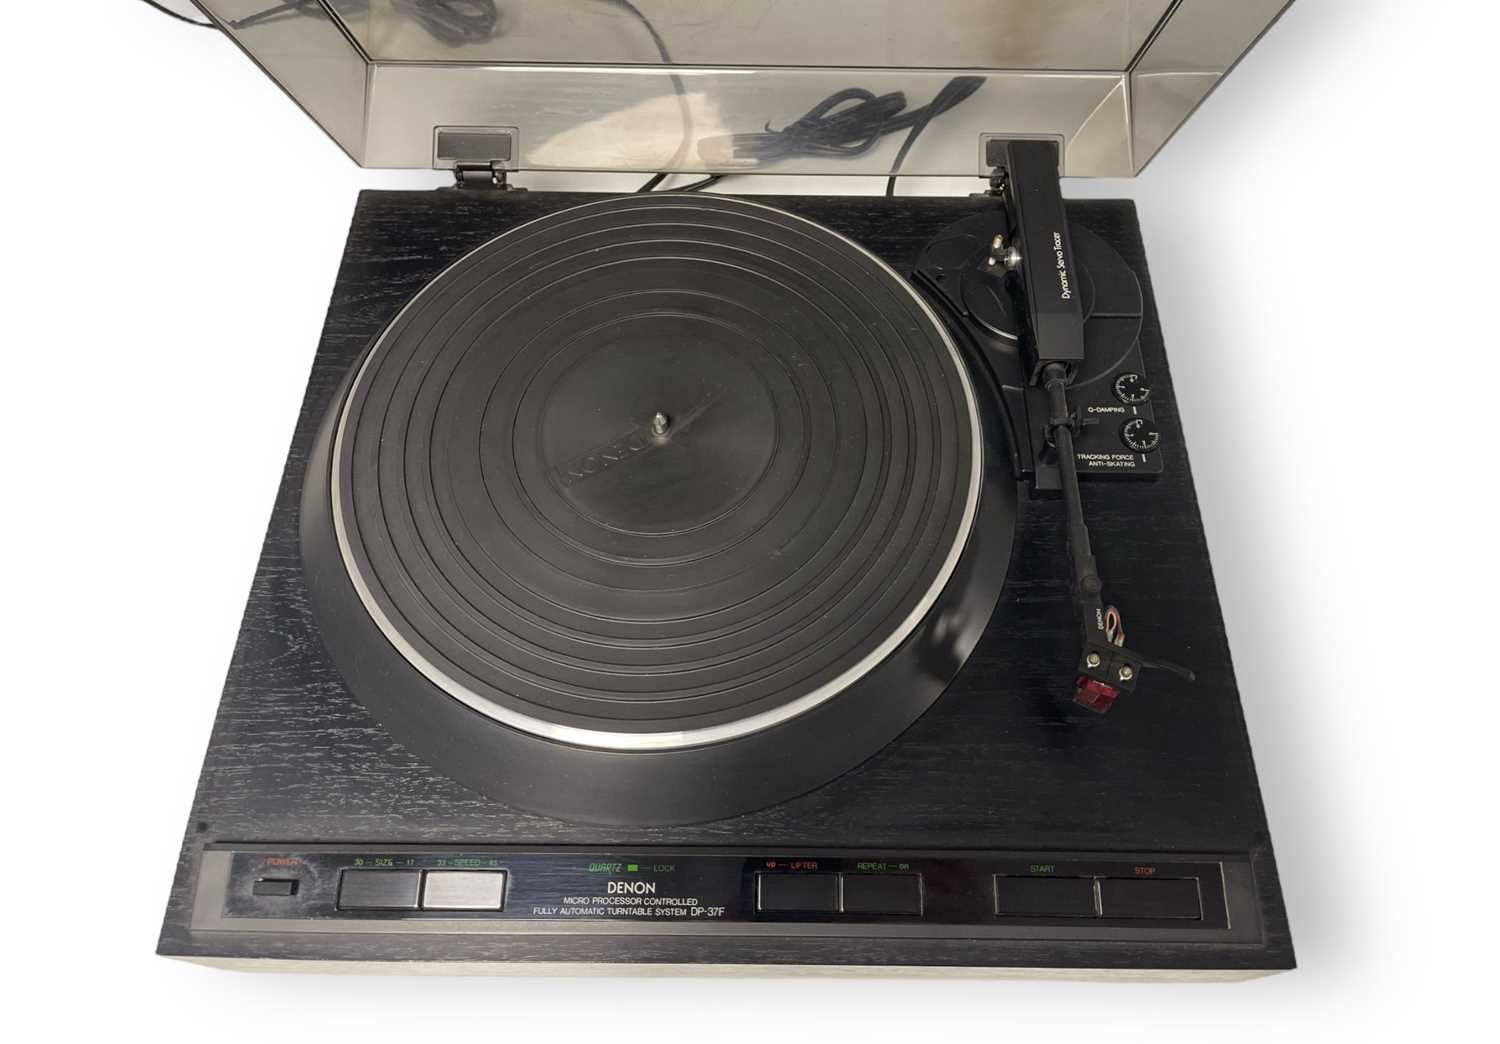 DENON DP-37F TURNTABLE. - Image 2 of 3